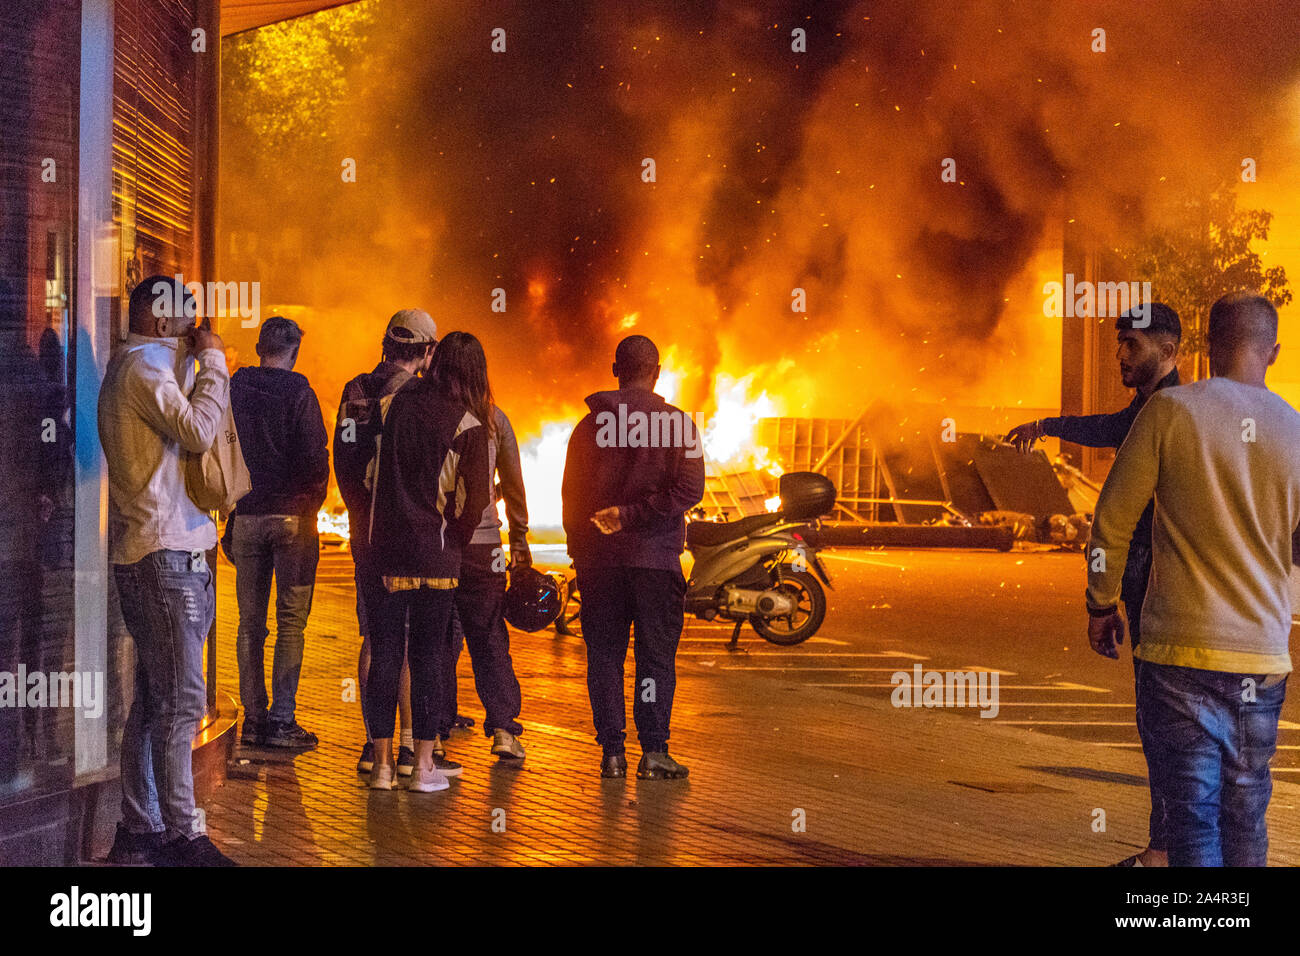 Barcelona, Spain - October 16, 2019: Tourists looking at the fire on the streets of Barcelona as part of the protests again the prison sentence to catalan leaders for organizing the independence referendum Credit: Dino Geromella/Alamy Live News Stock Photo